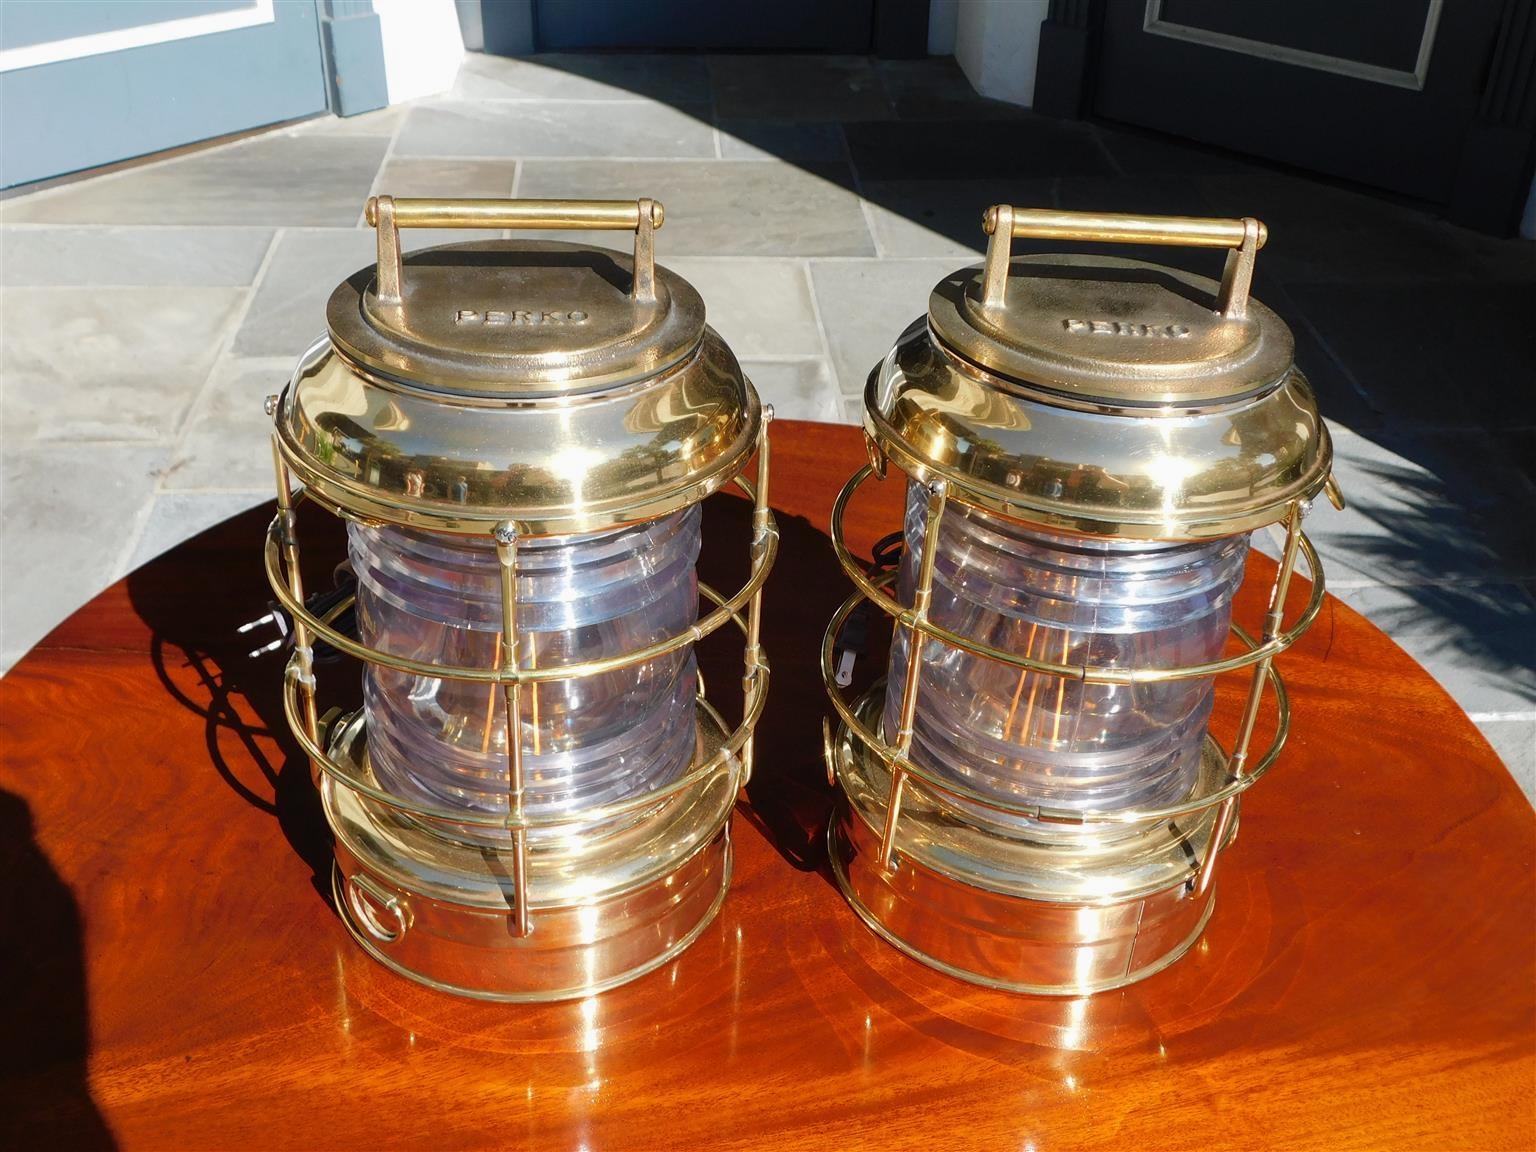 Pair of Brass Beacon Marine Lanterns with flanking threaded handle lids, protective exterior cages, and original clear Fresnel lenses. Pair of lanterns have been electrified. Stamped Perko Company, NY. Late 19th century.